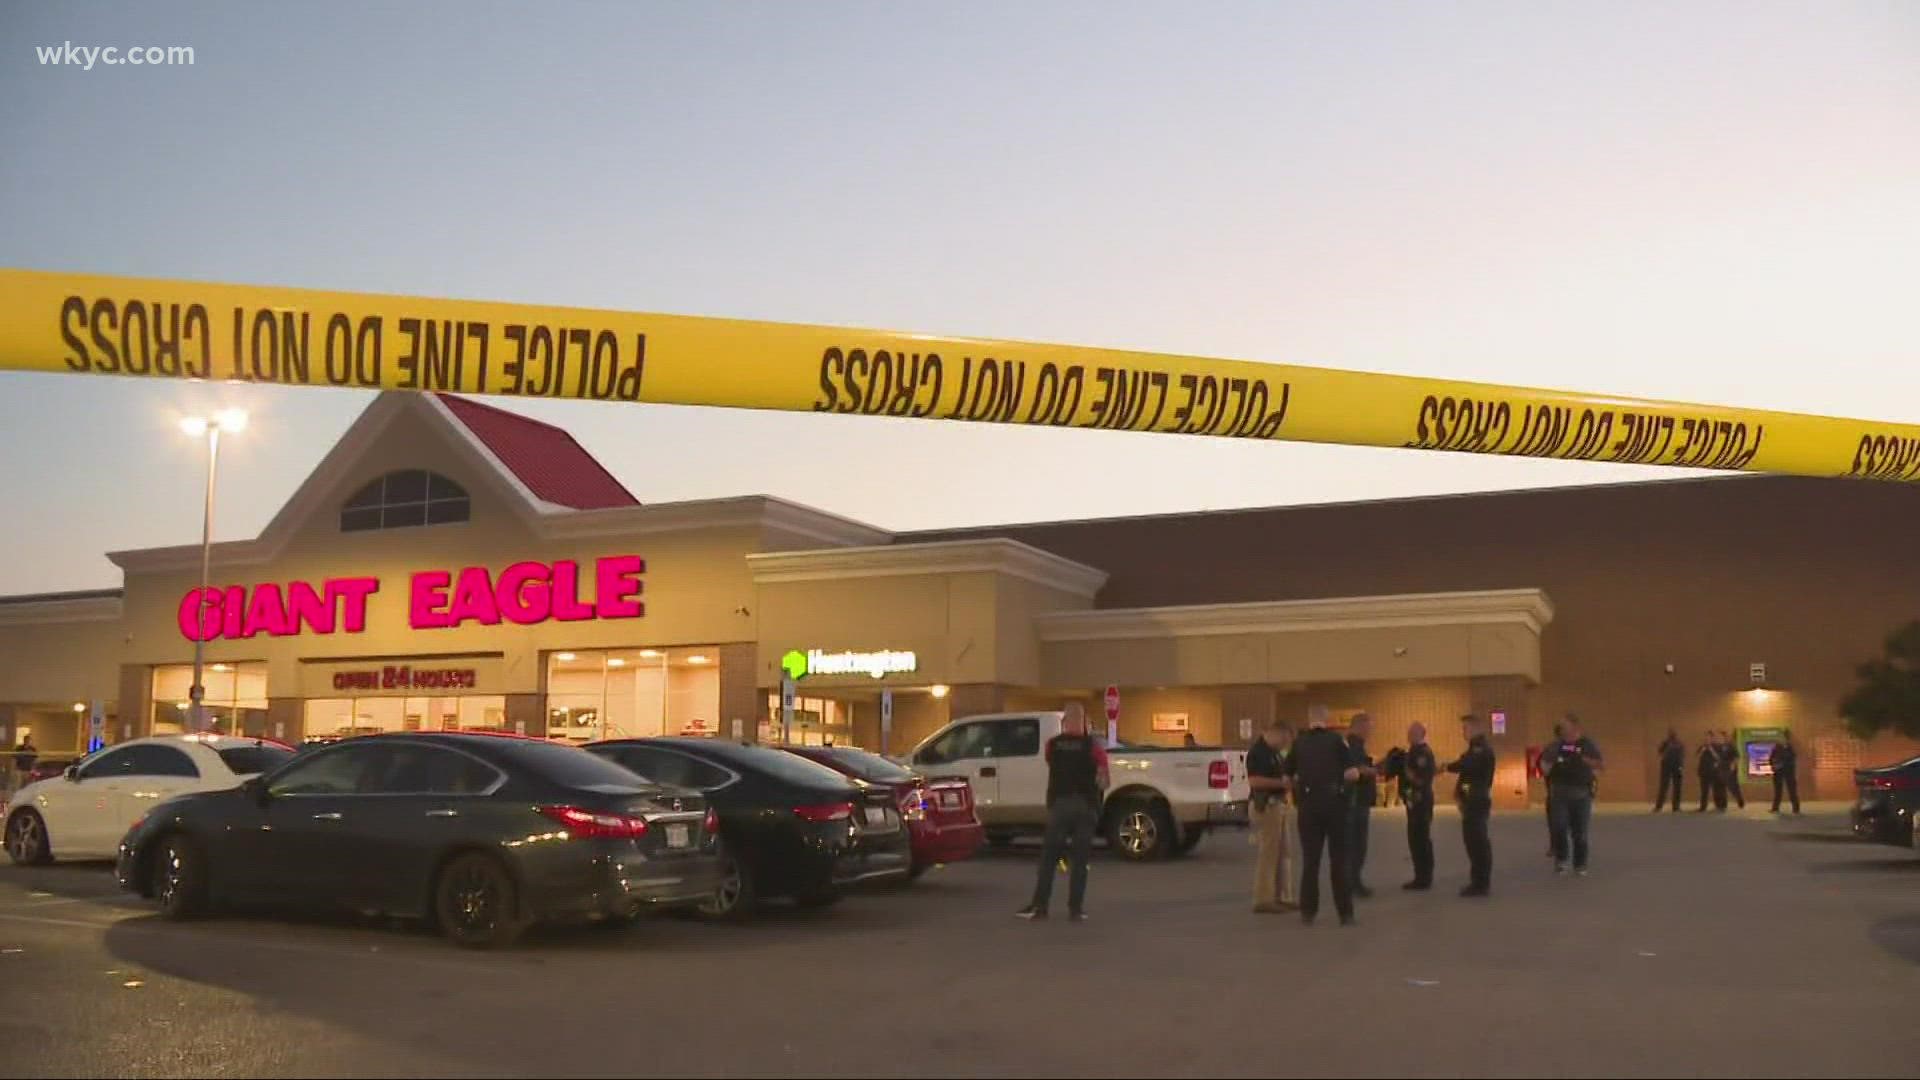 An off-duty Cleveland police officer shot a male in the parking lot of the Giant Eagle on West 117th Street. The matter remains under investigation at this time.